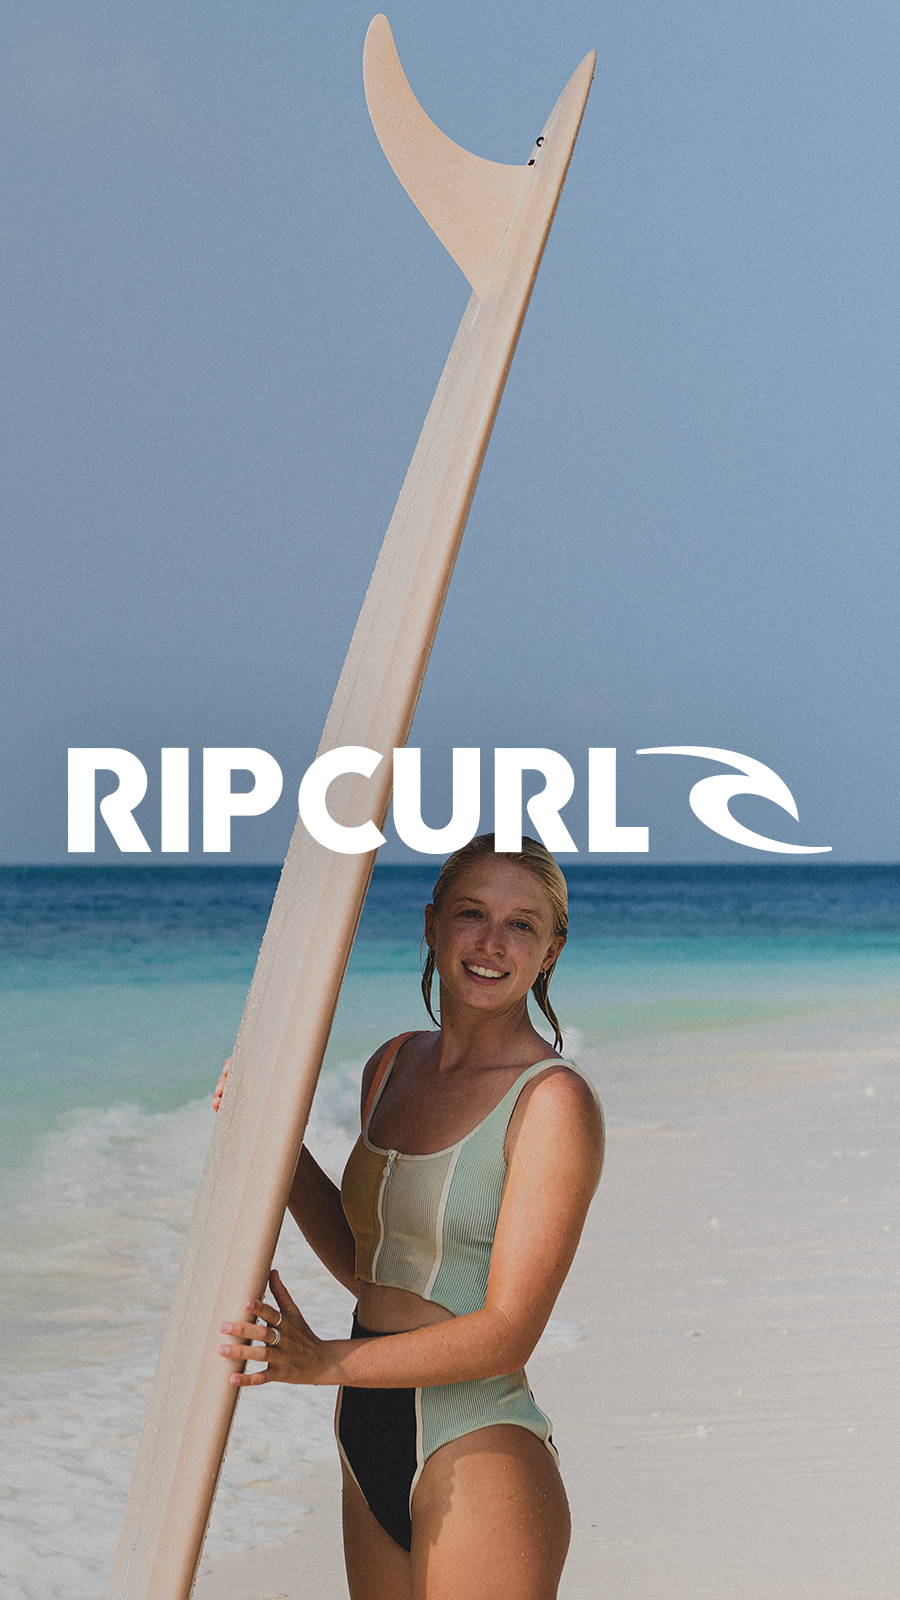 Young woman Sillaing on beach in Rip Curl bathing suit holding up surf board